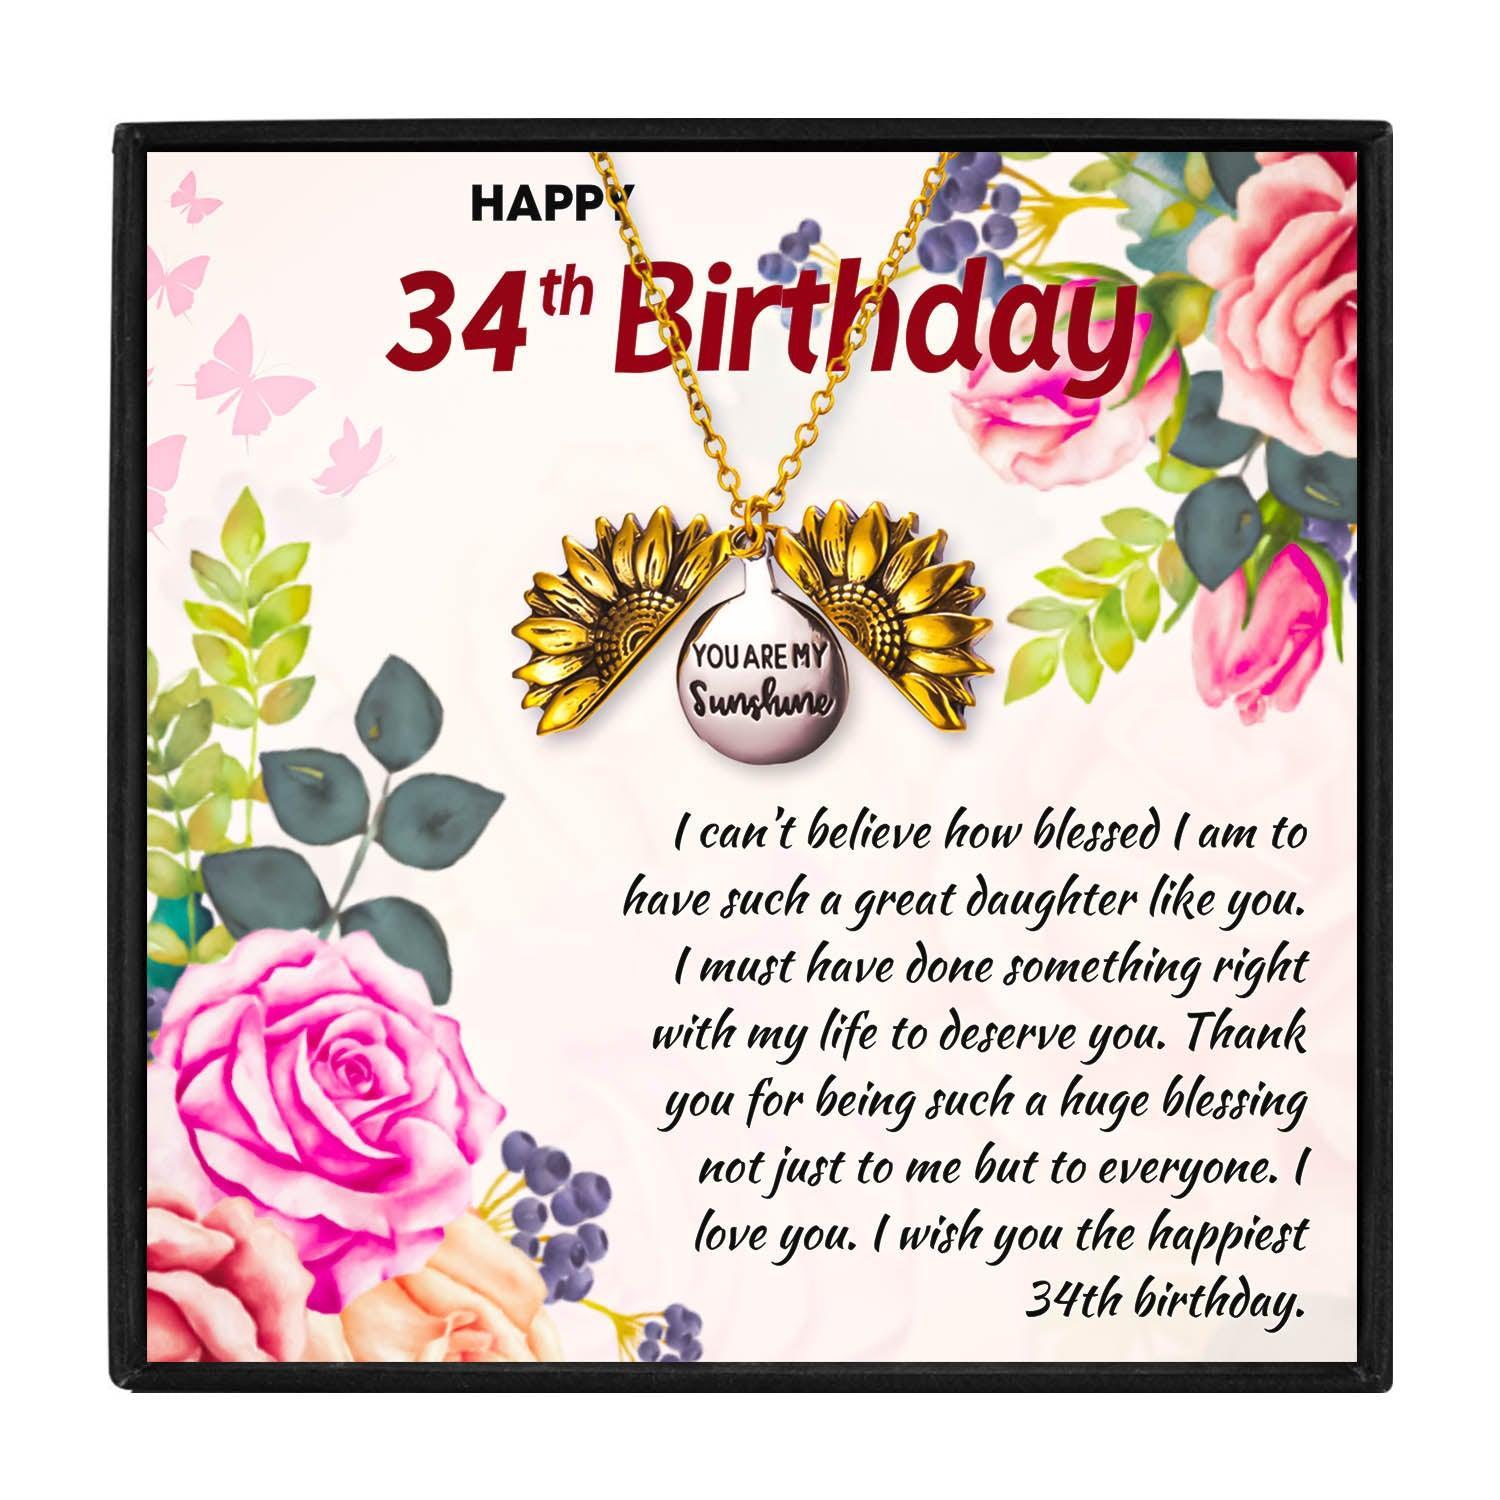 34th Birthday Ideas 34 Year Old Woman in 2023 | 34th Birthday Ideas 34 Year Old Woman - undefined | 34 Birthday Ideas Gifts, 34th Birthday Gifts, 34th Birthday Gifts for Women | From Hunny Life | hunnylife.com